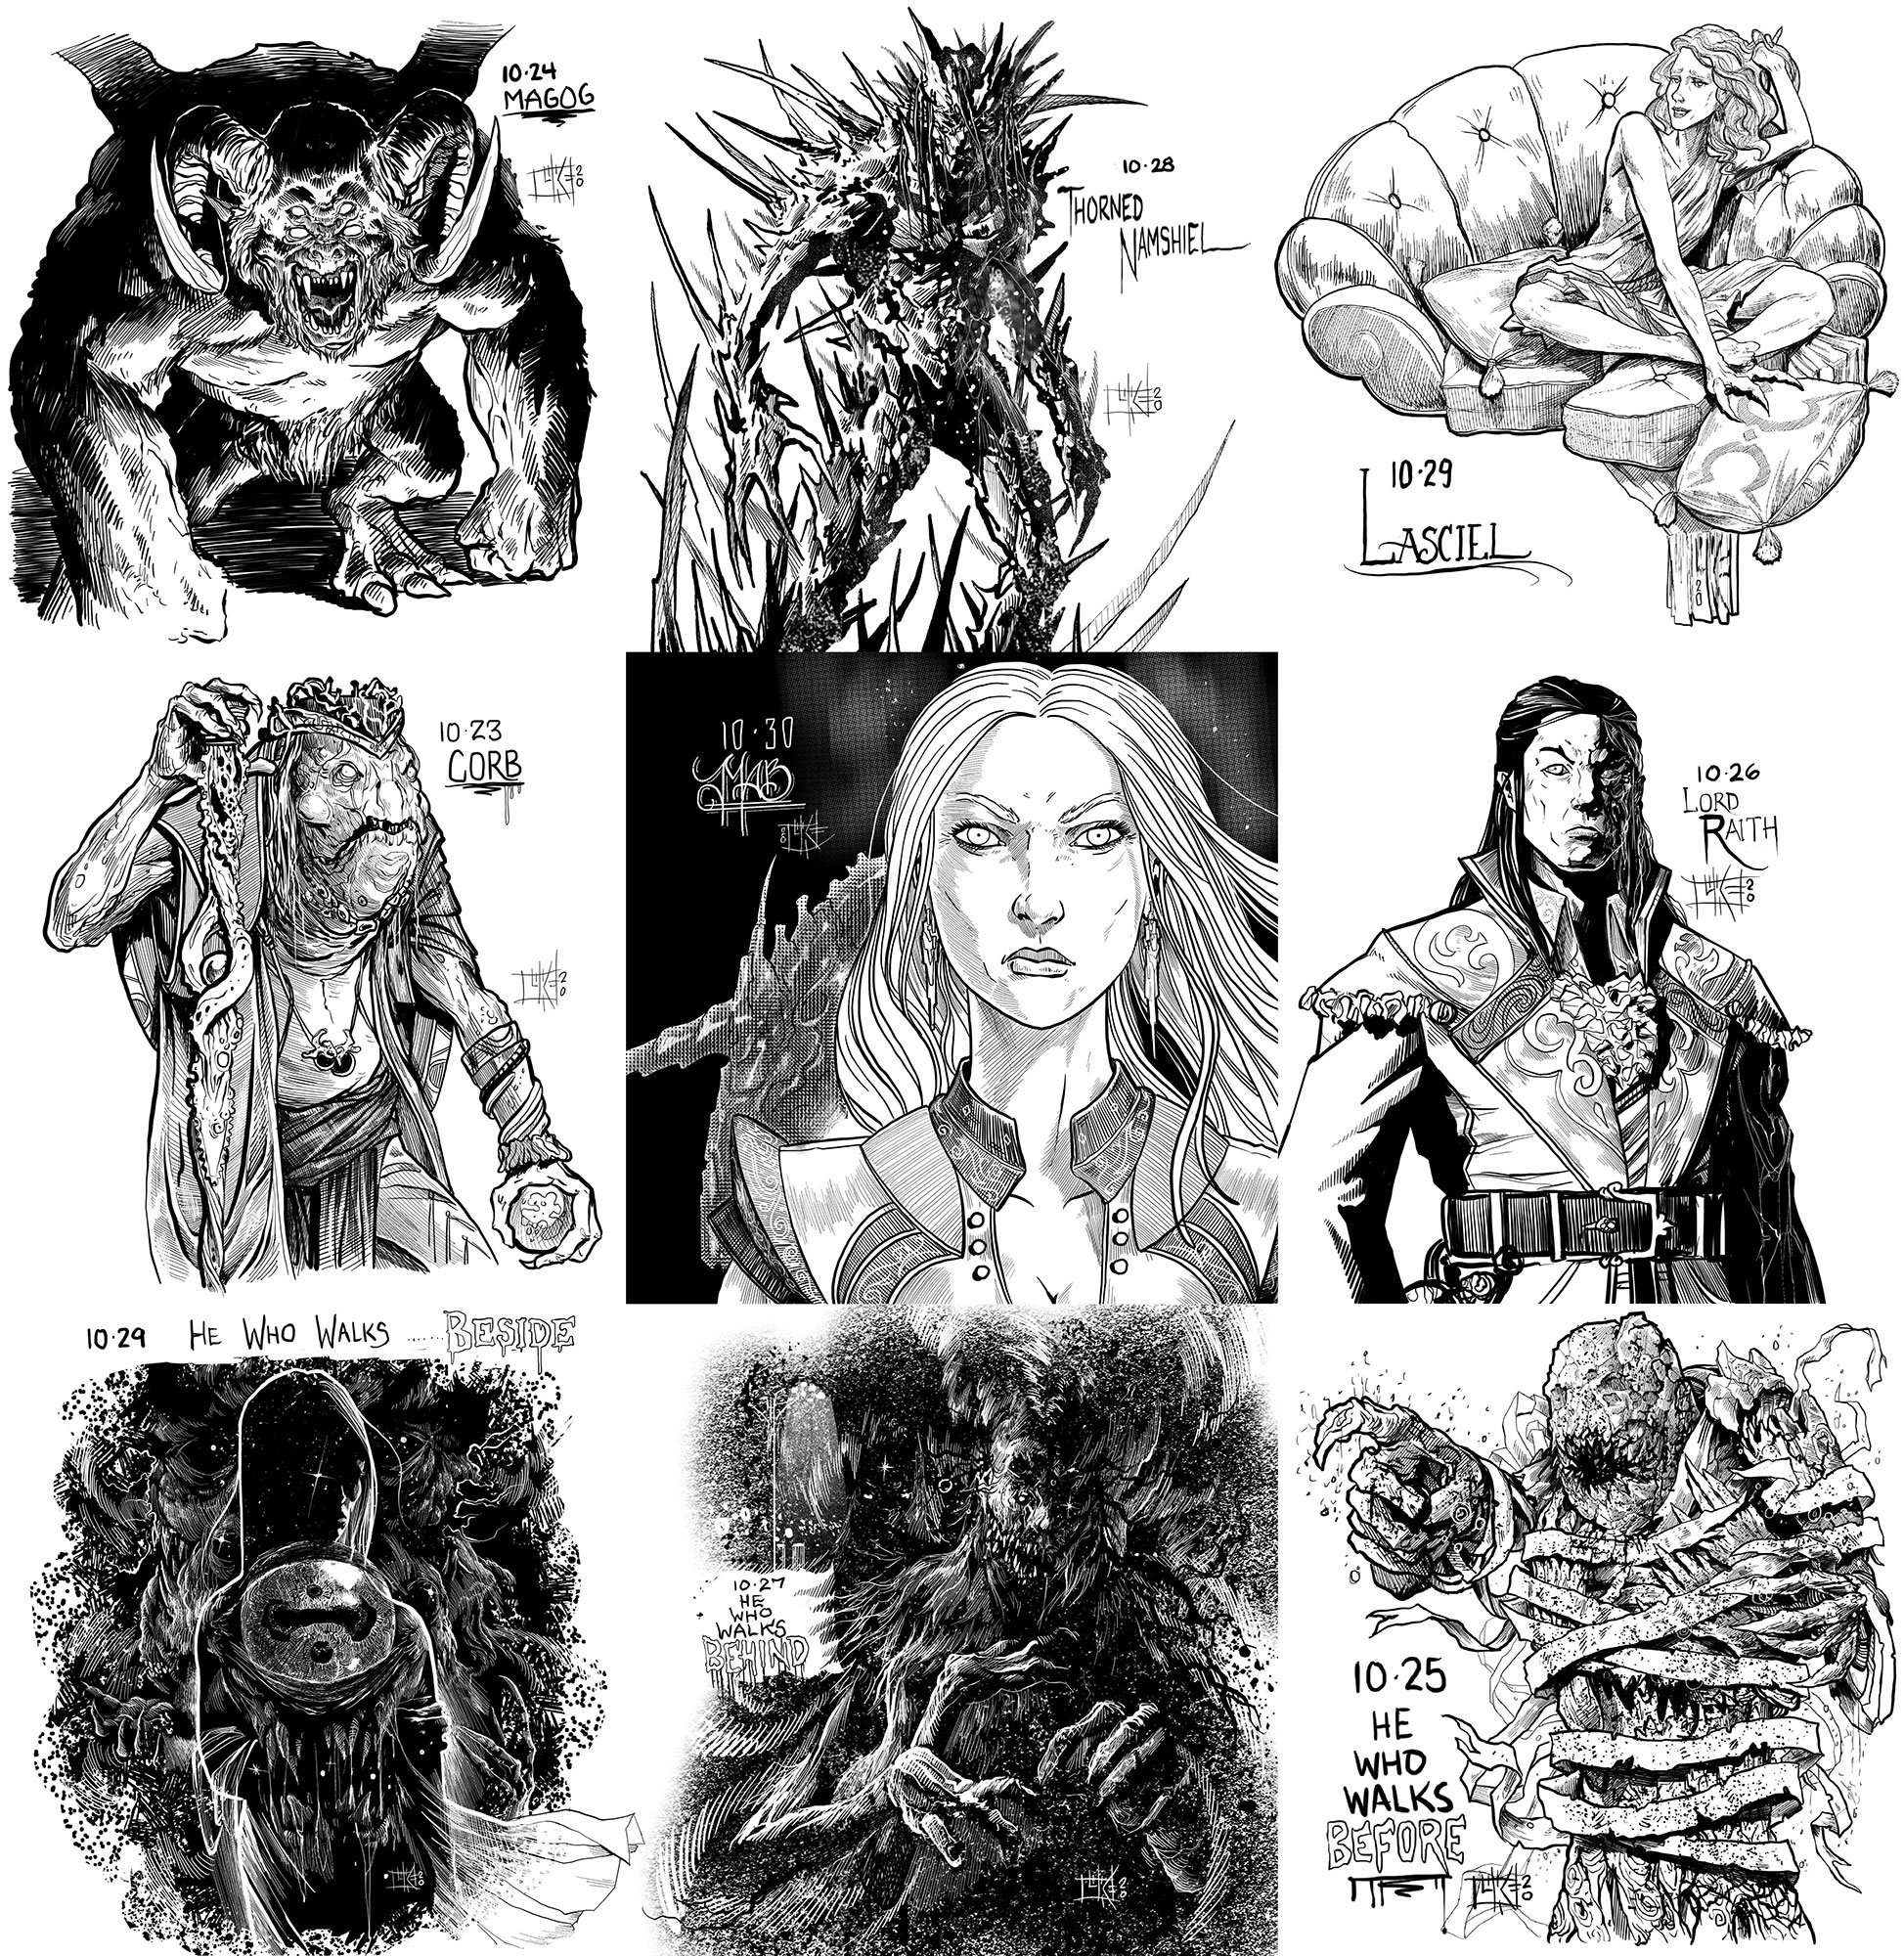 Collage of images by Luke Schroder for Inktober: Magog, Thorned Namshiel, Lasciel, King Corb, Mab, Lord Raith, and He Who Walks Beside, Behind, and Before